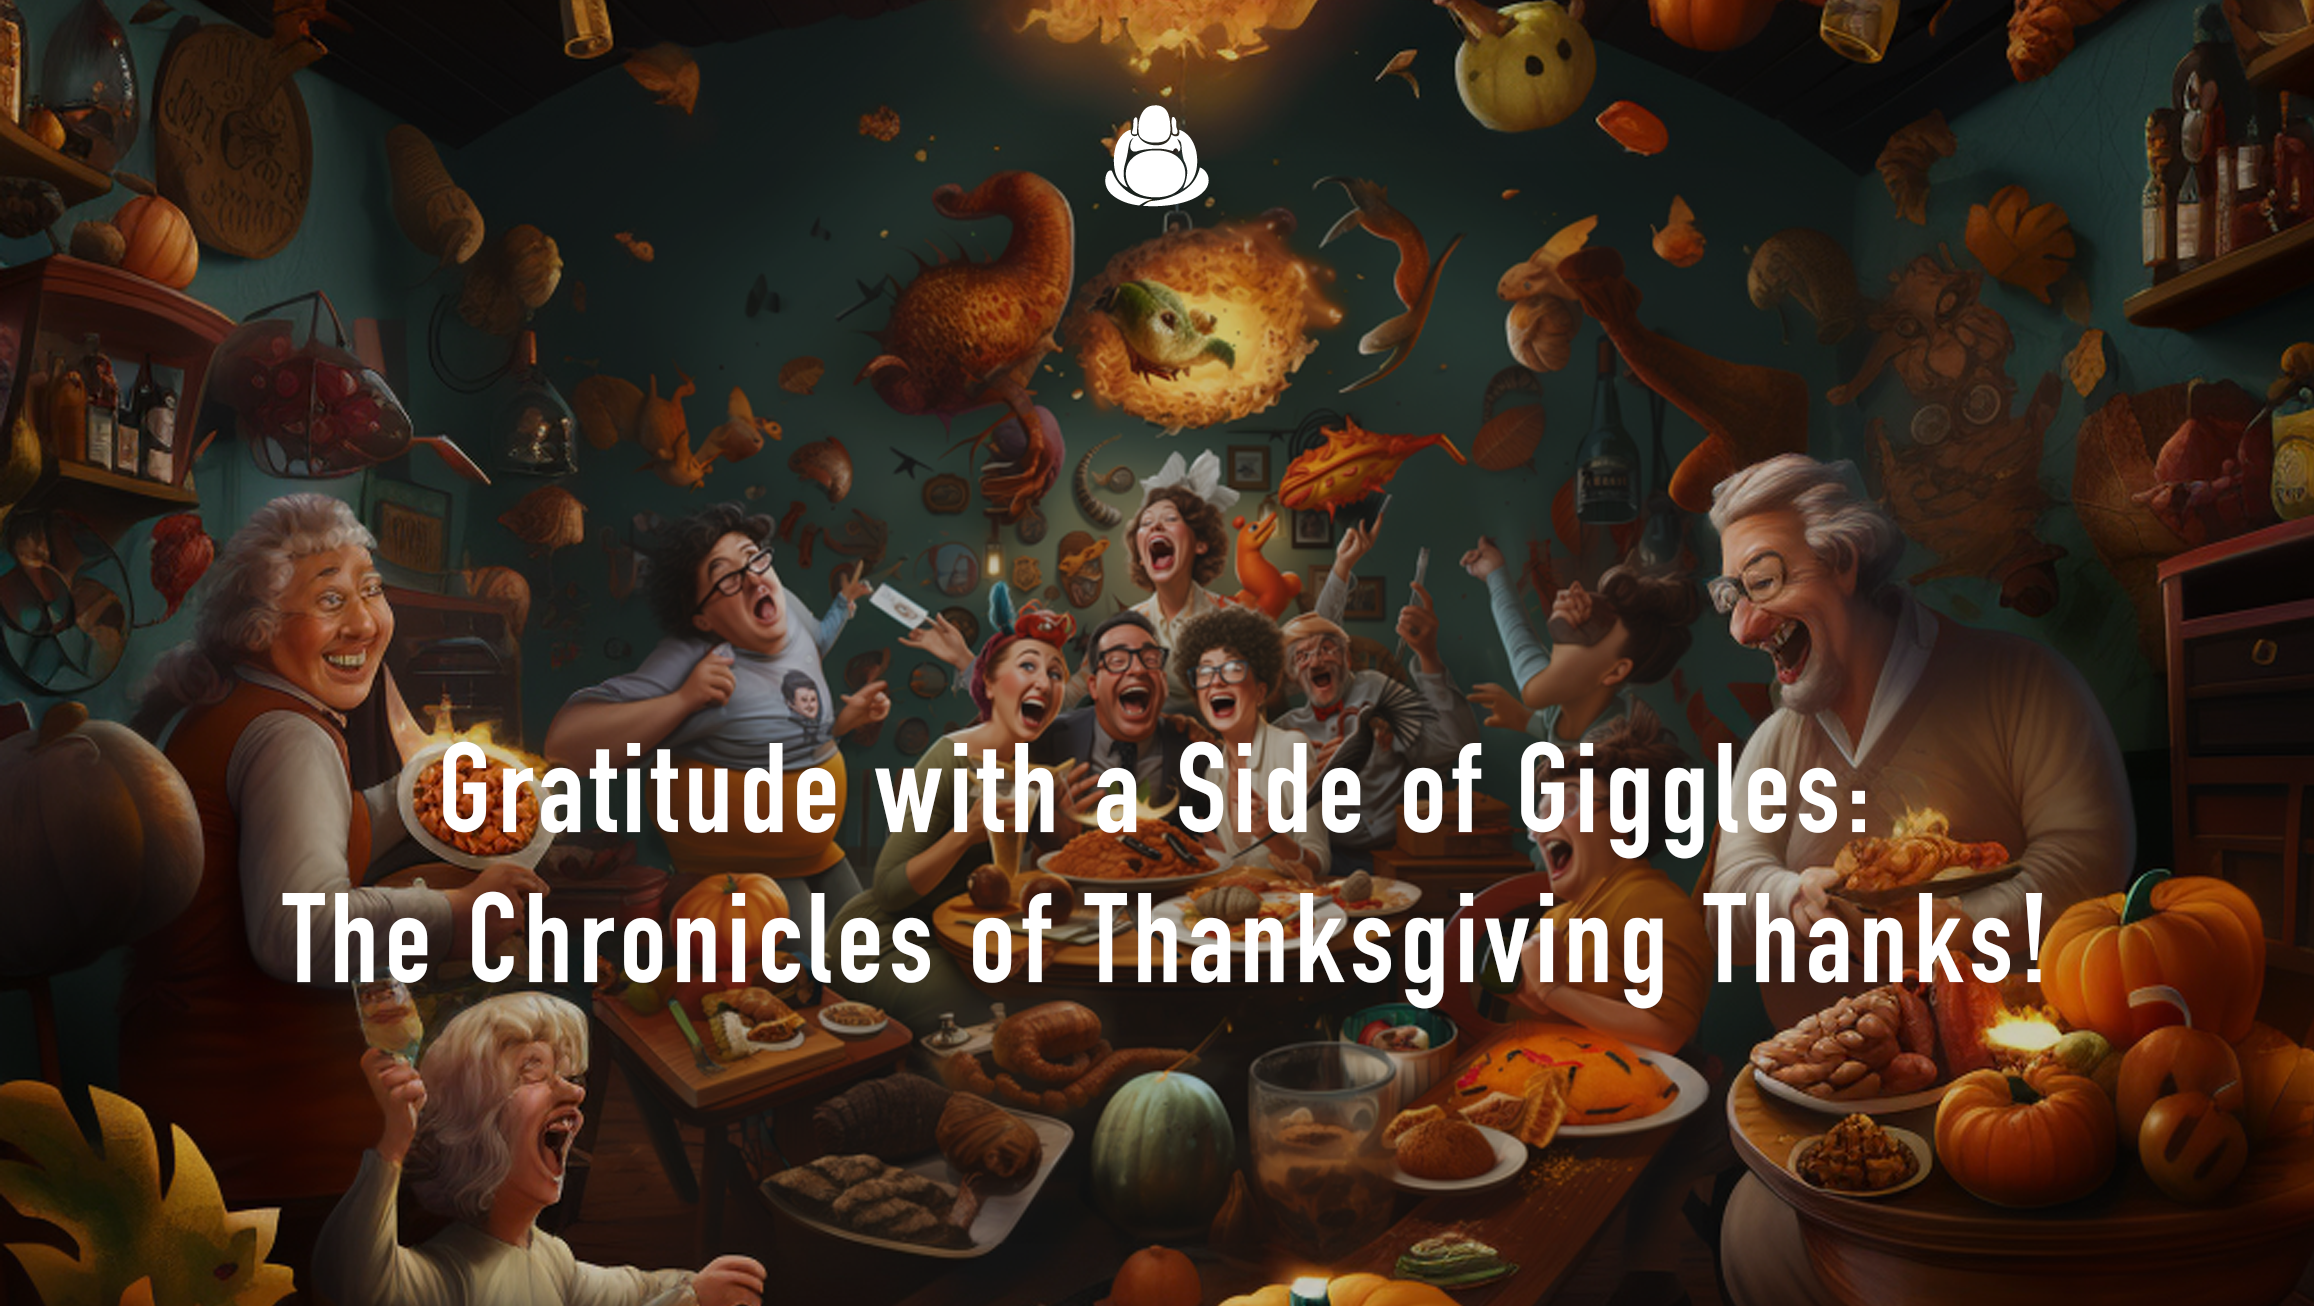 Gratitude with a Side of Giggles: The Chronicles of Thanksgiving Thanks!